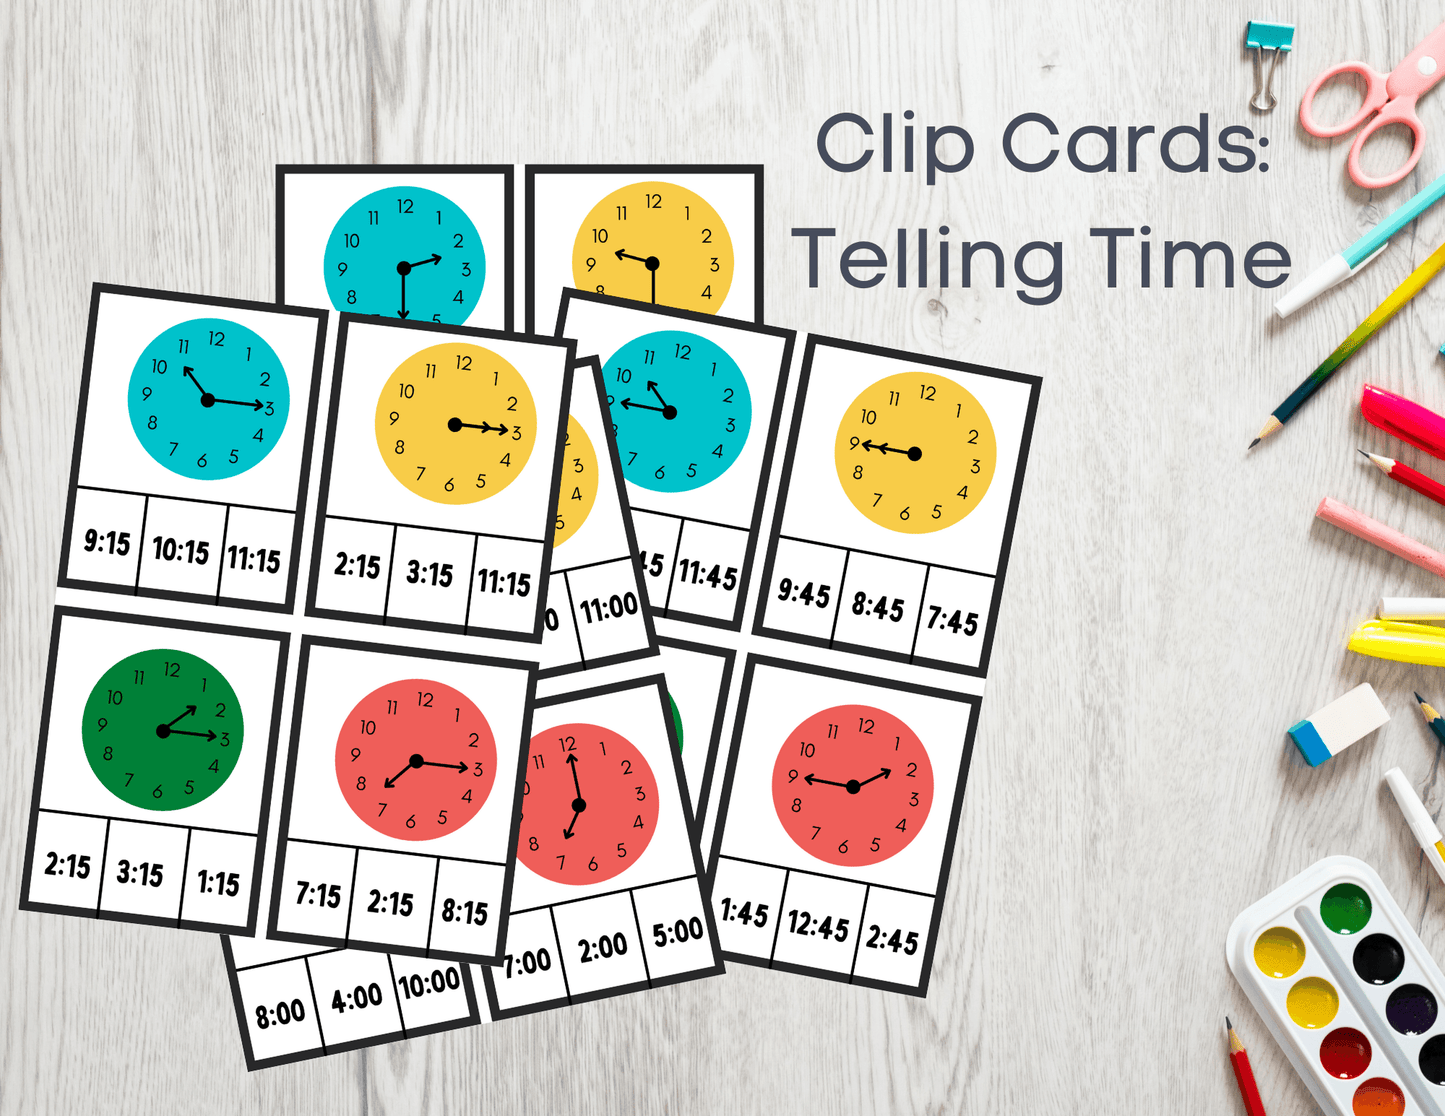 Clip Cards: Telling Time - 2 Paper Sisters